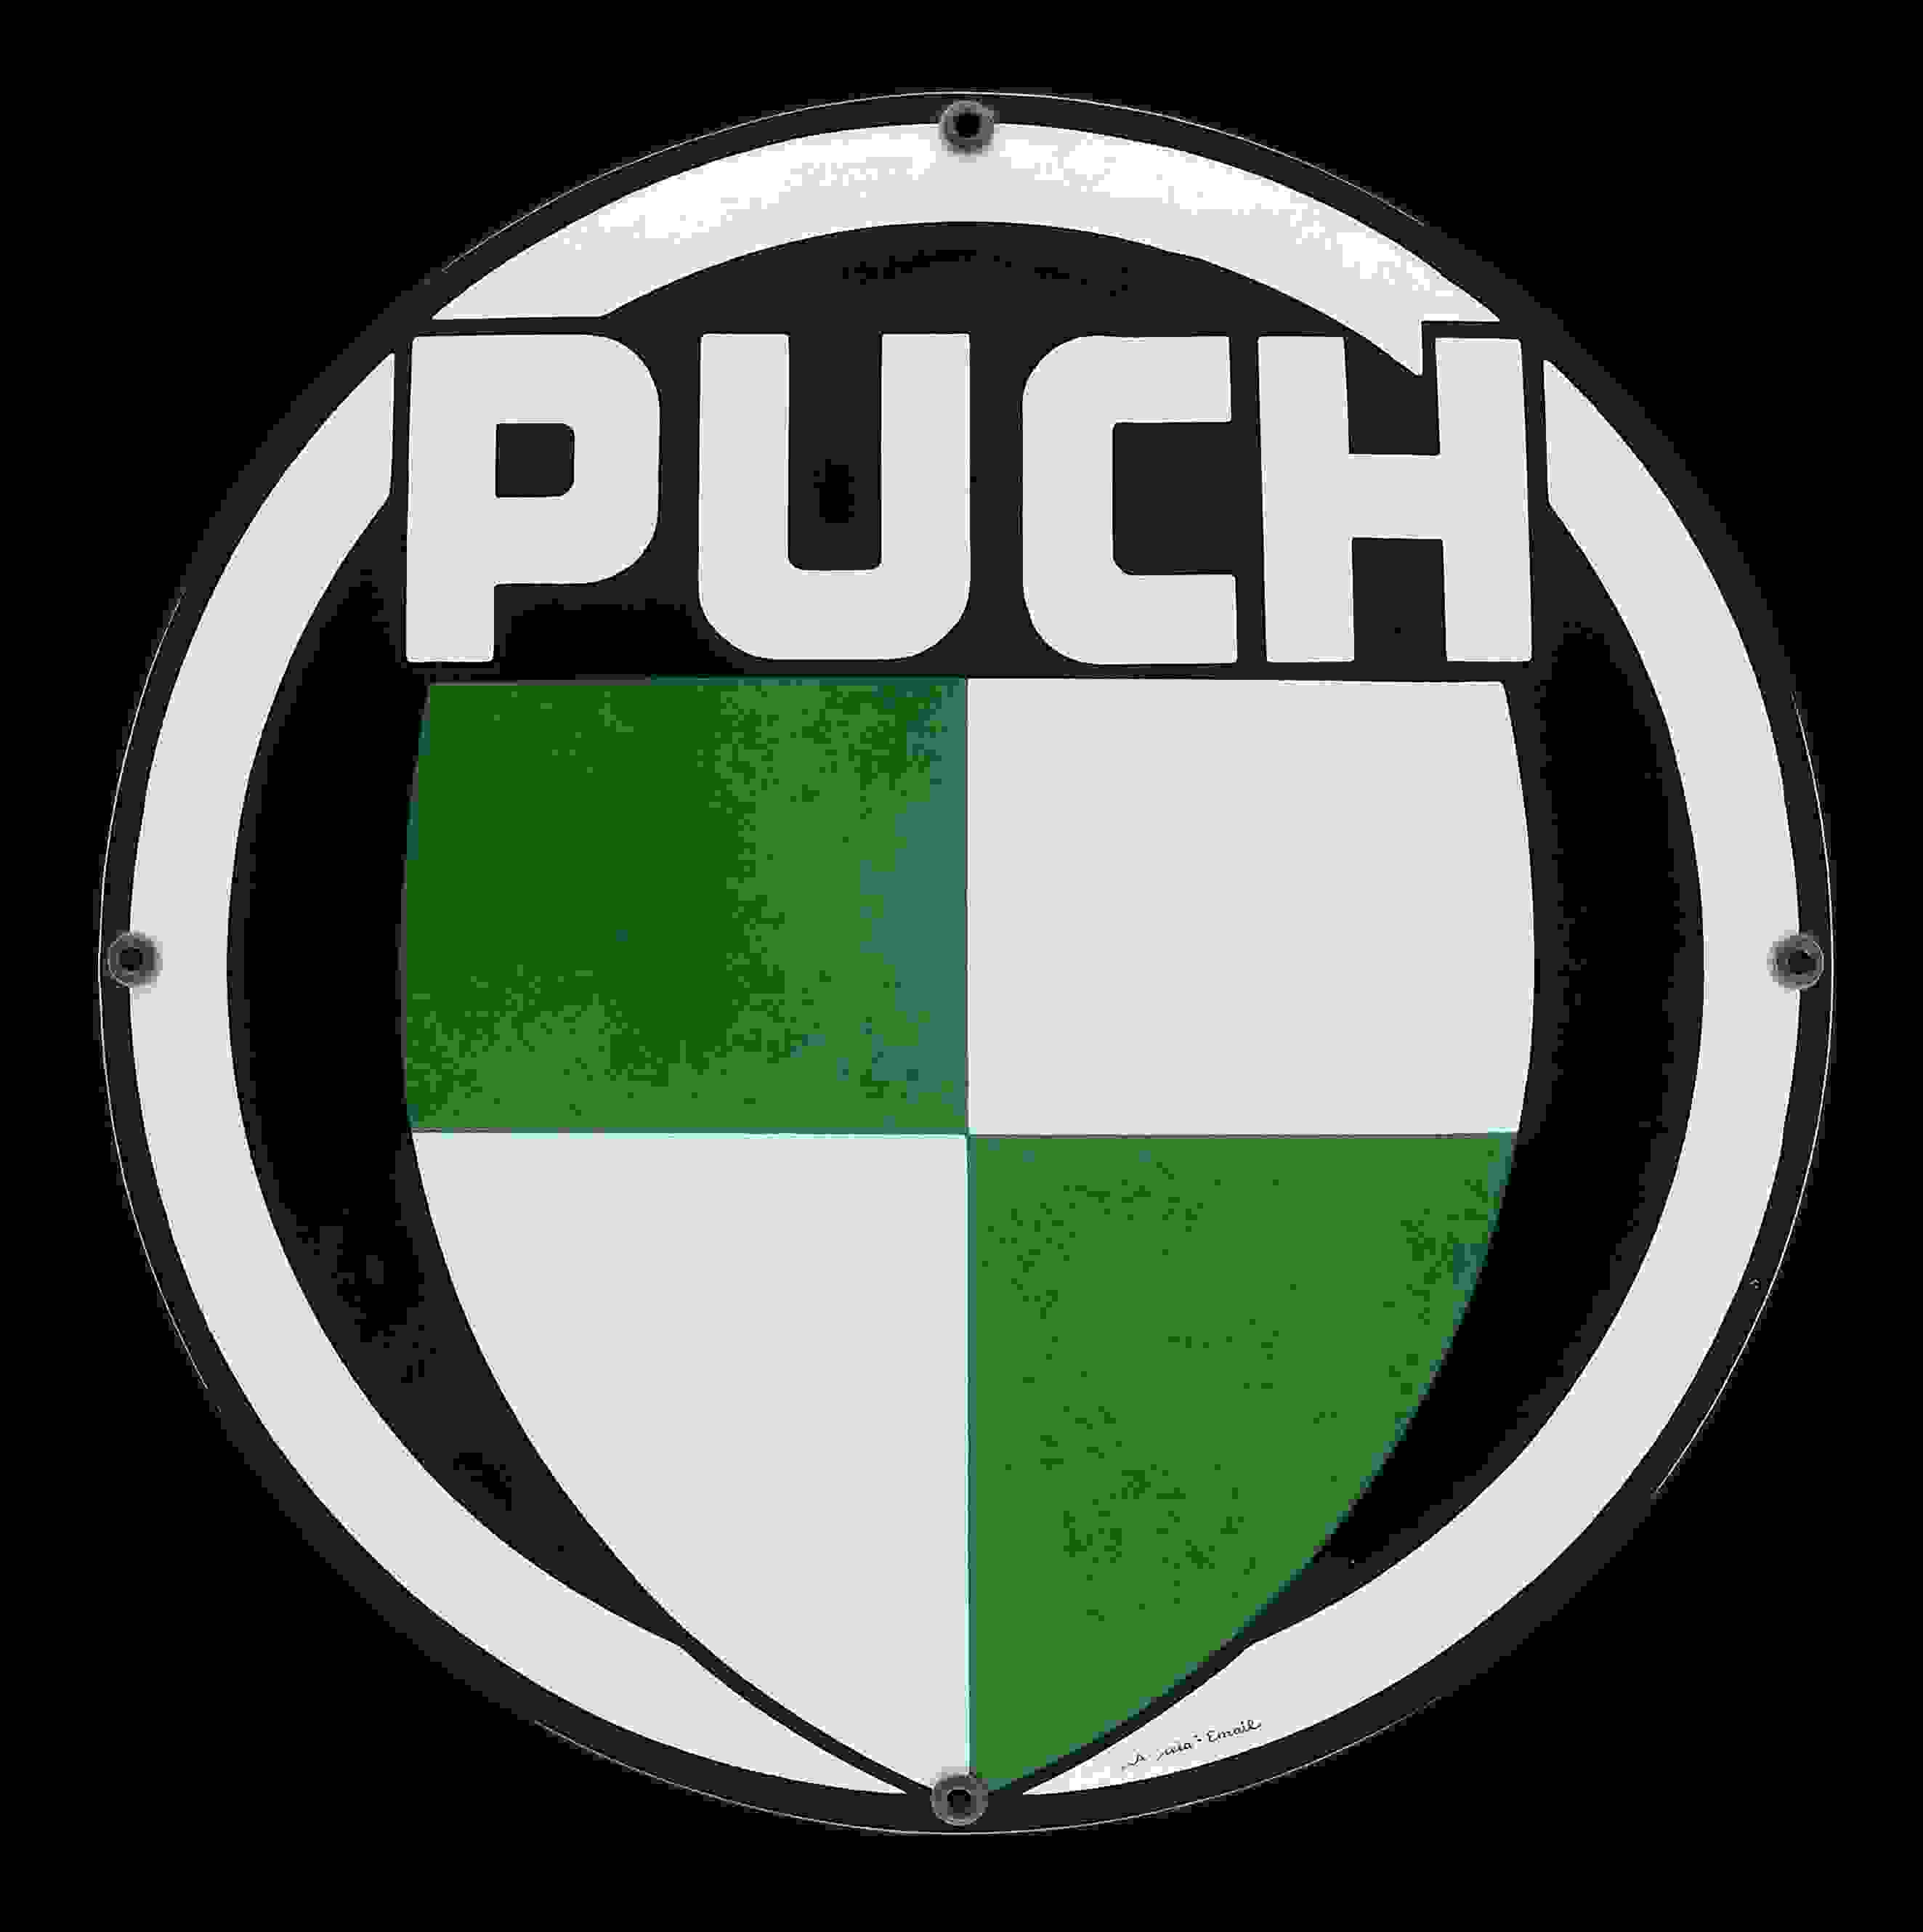 Puch 